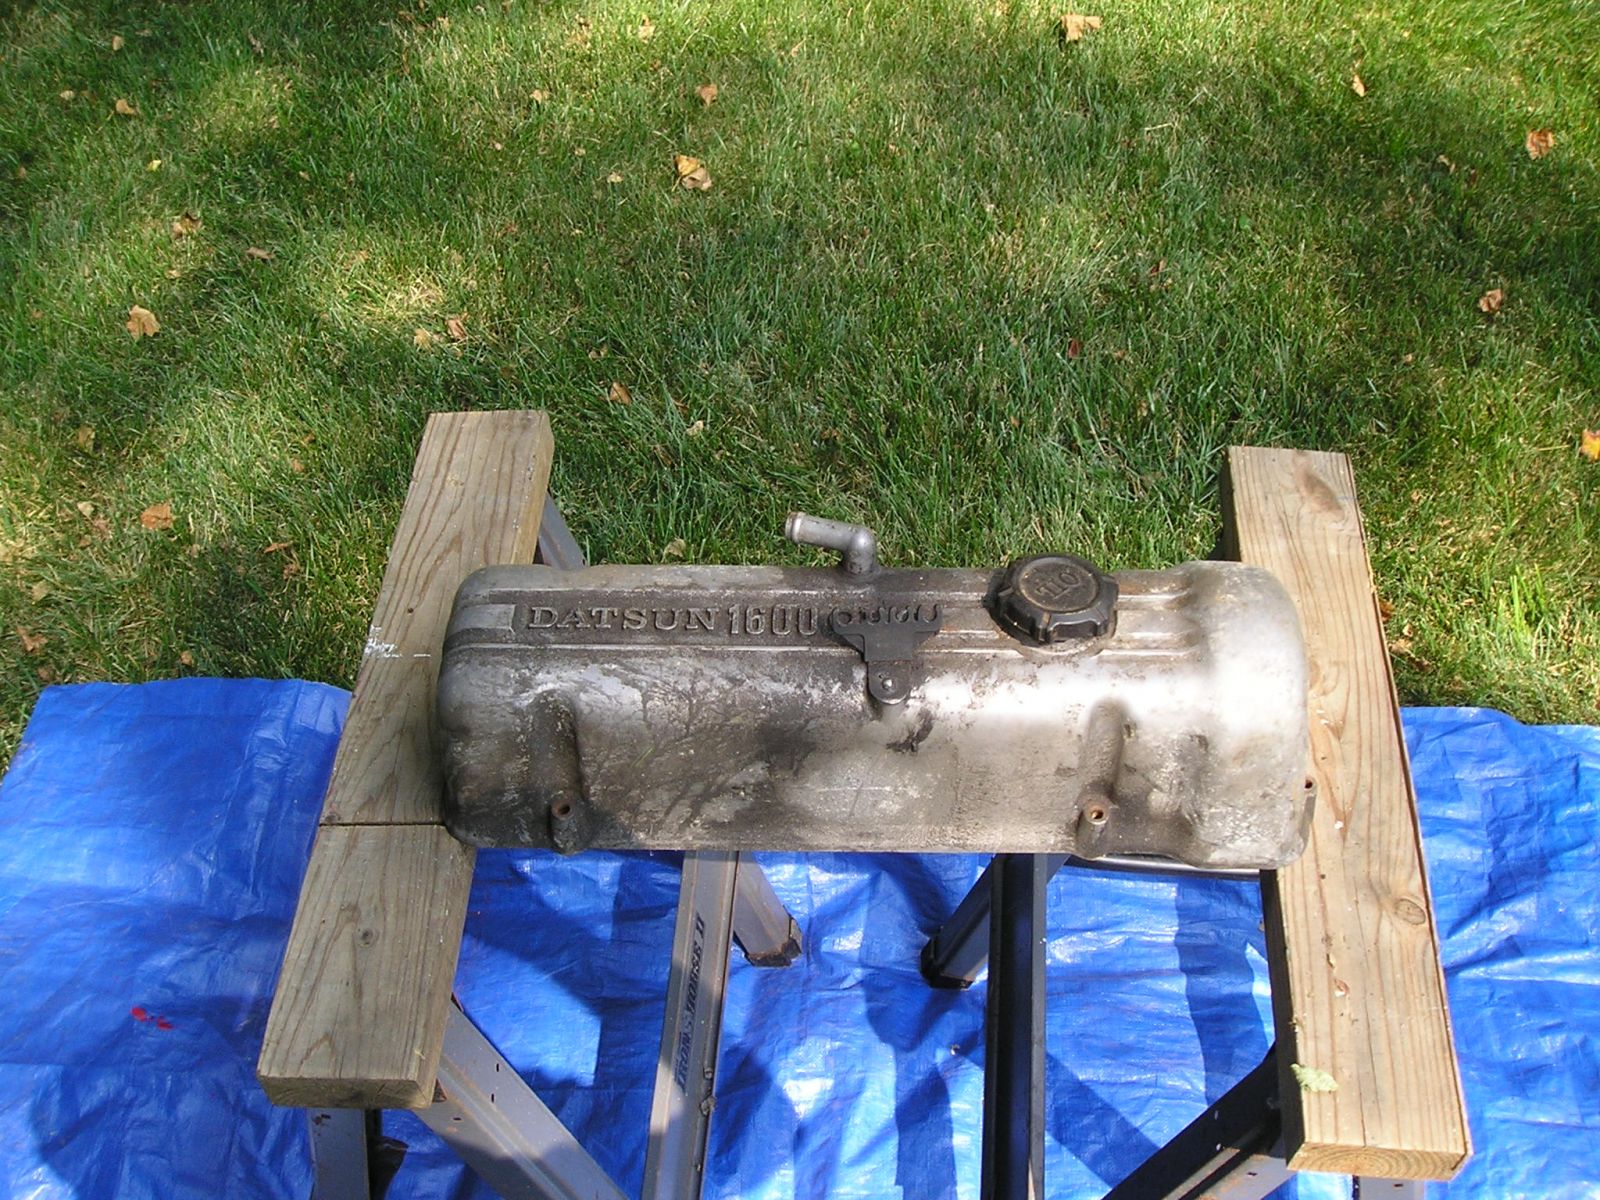 early L series valve cover with "DATSUN 1600 OHC" Insignia